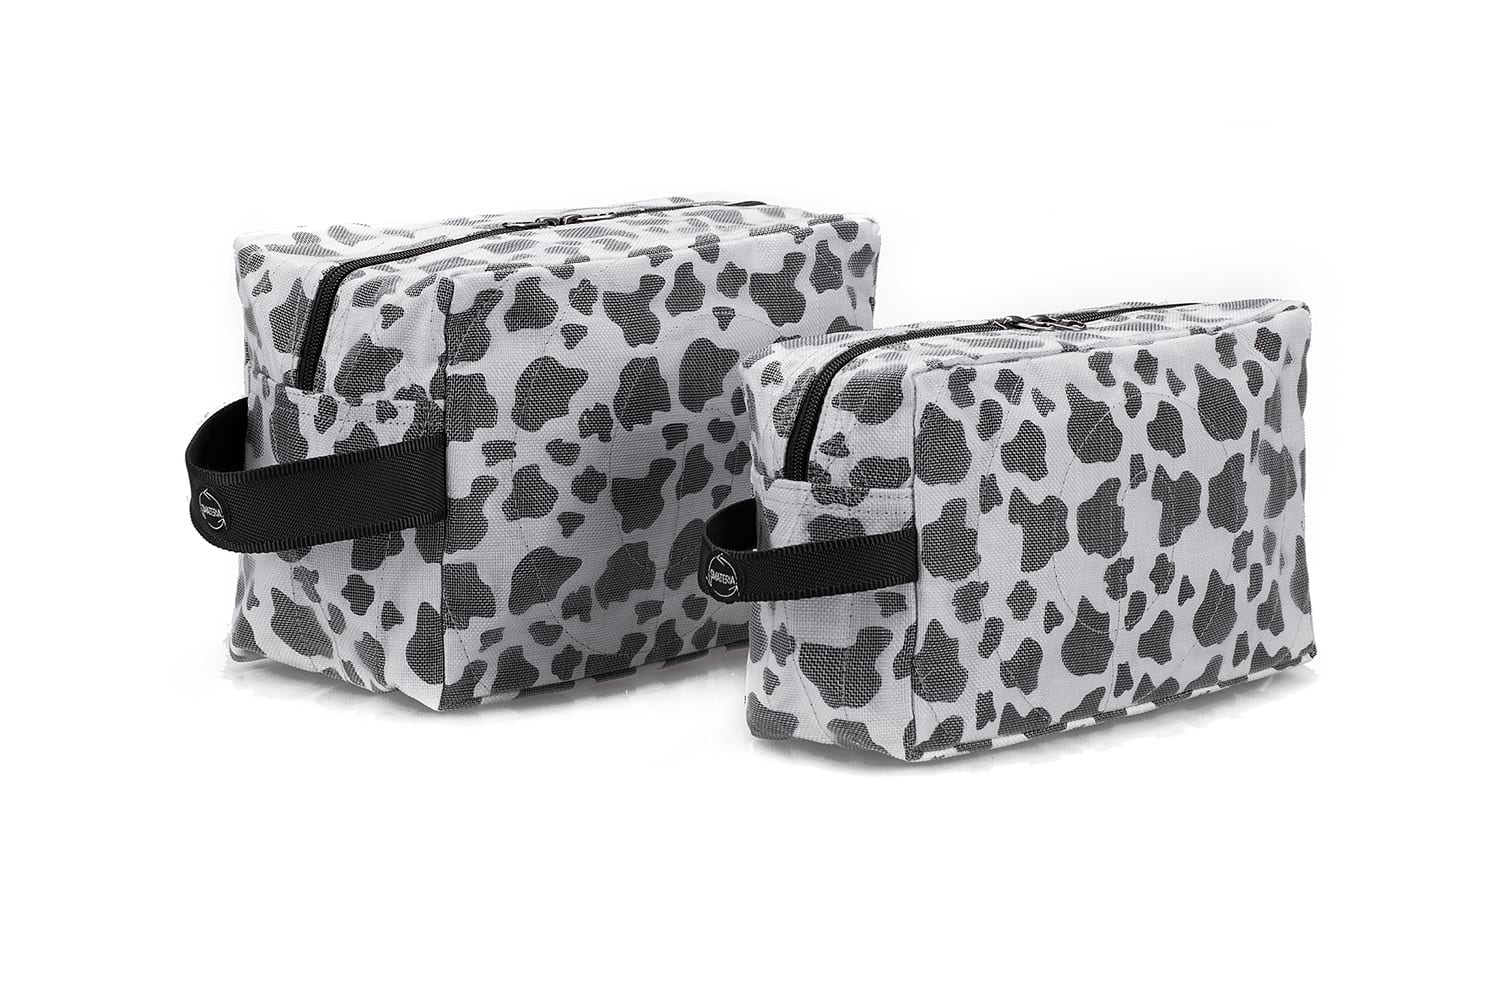 Ram - Ethical vanity case - Large - Small - Black and white spotted